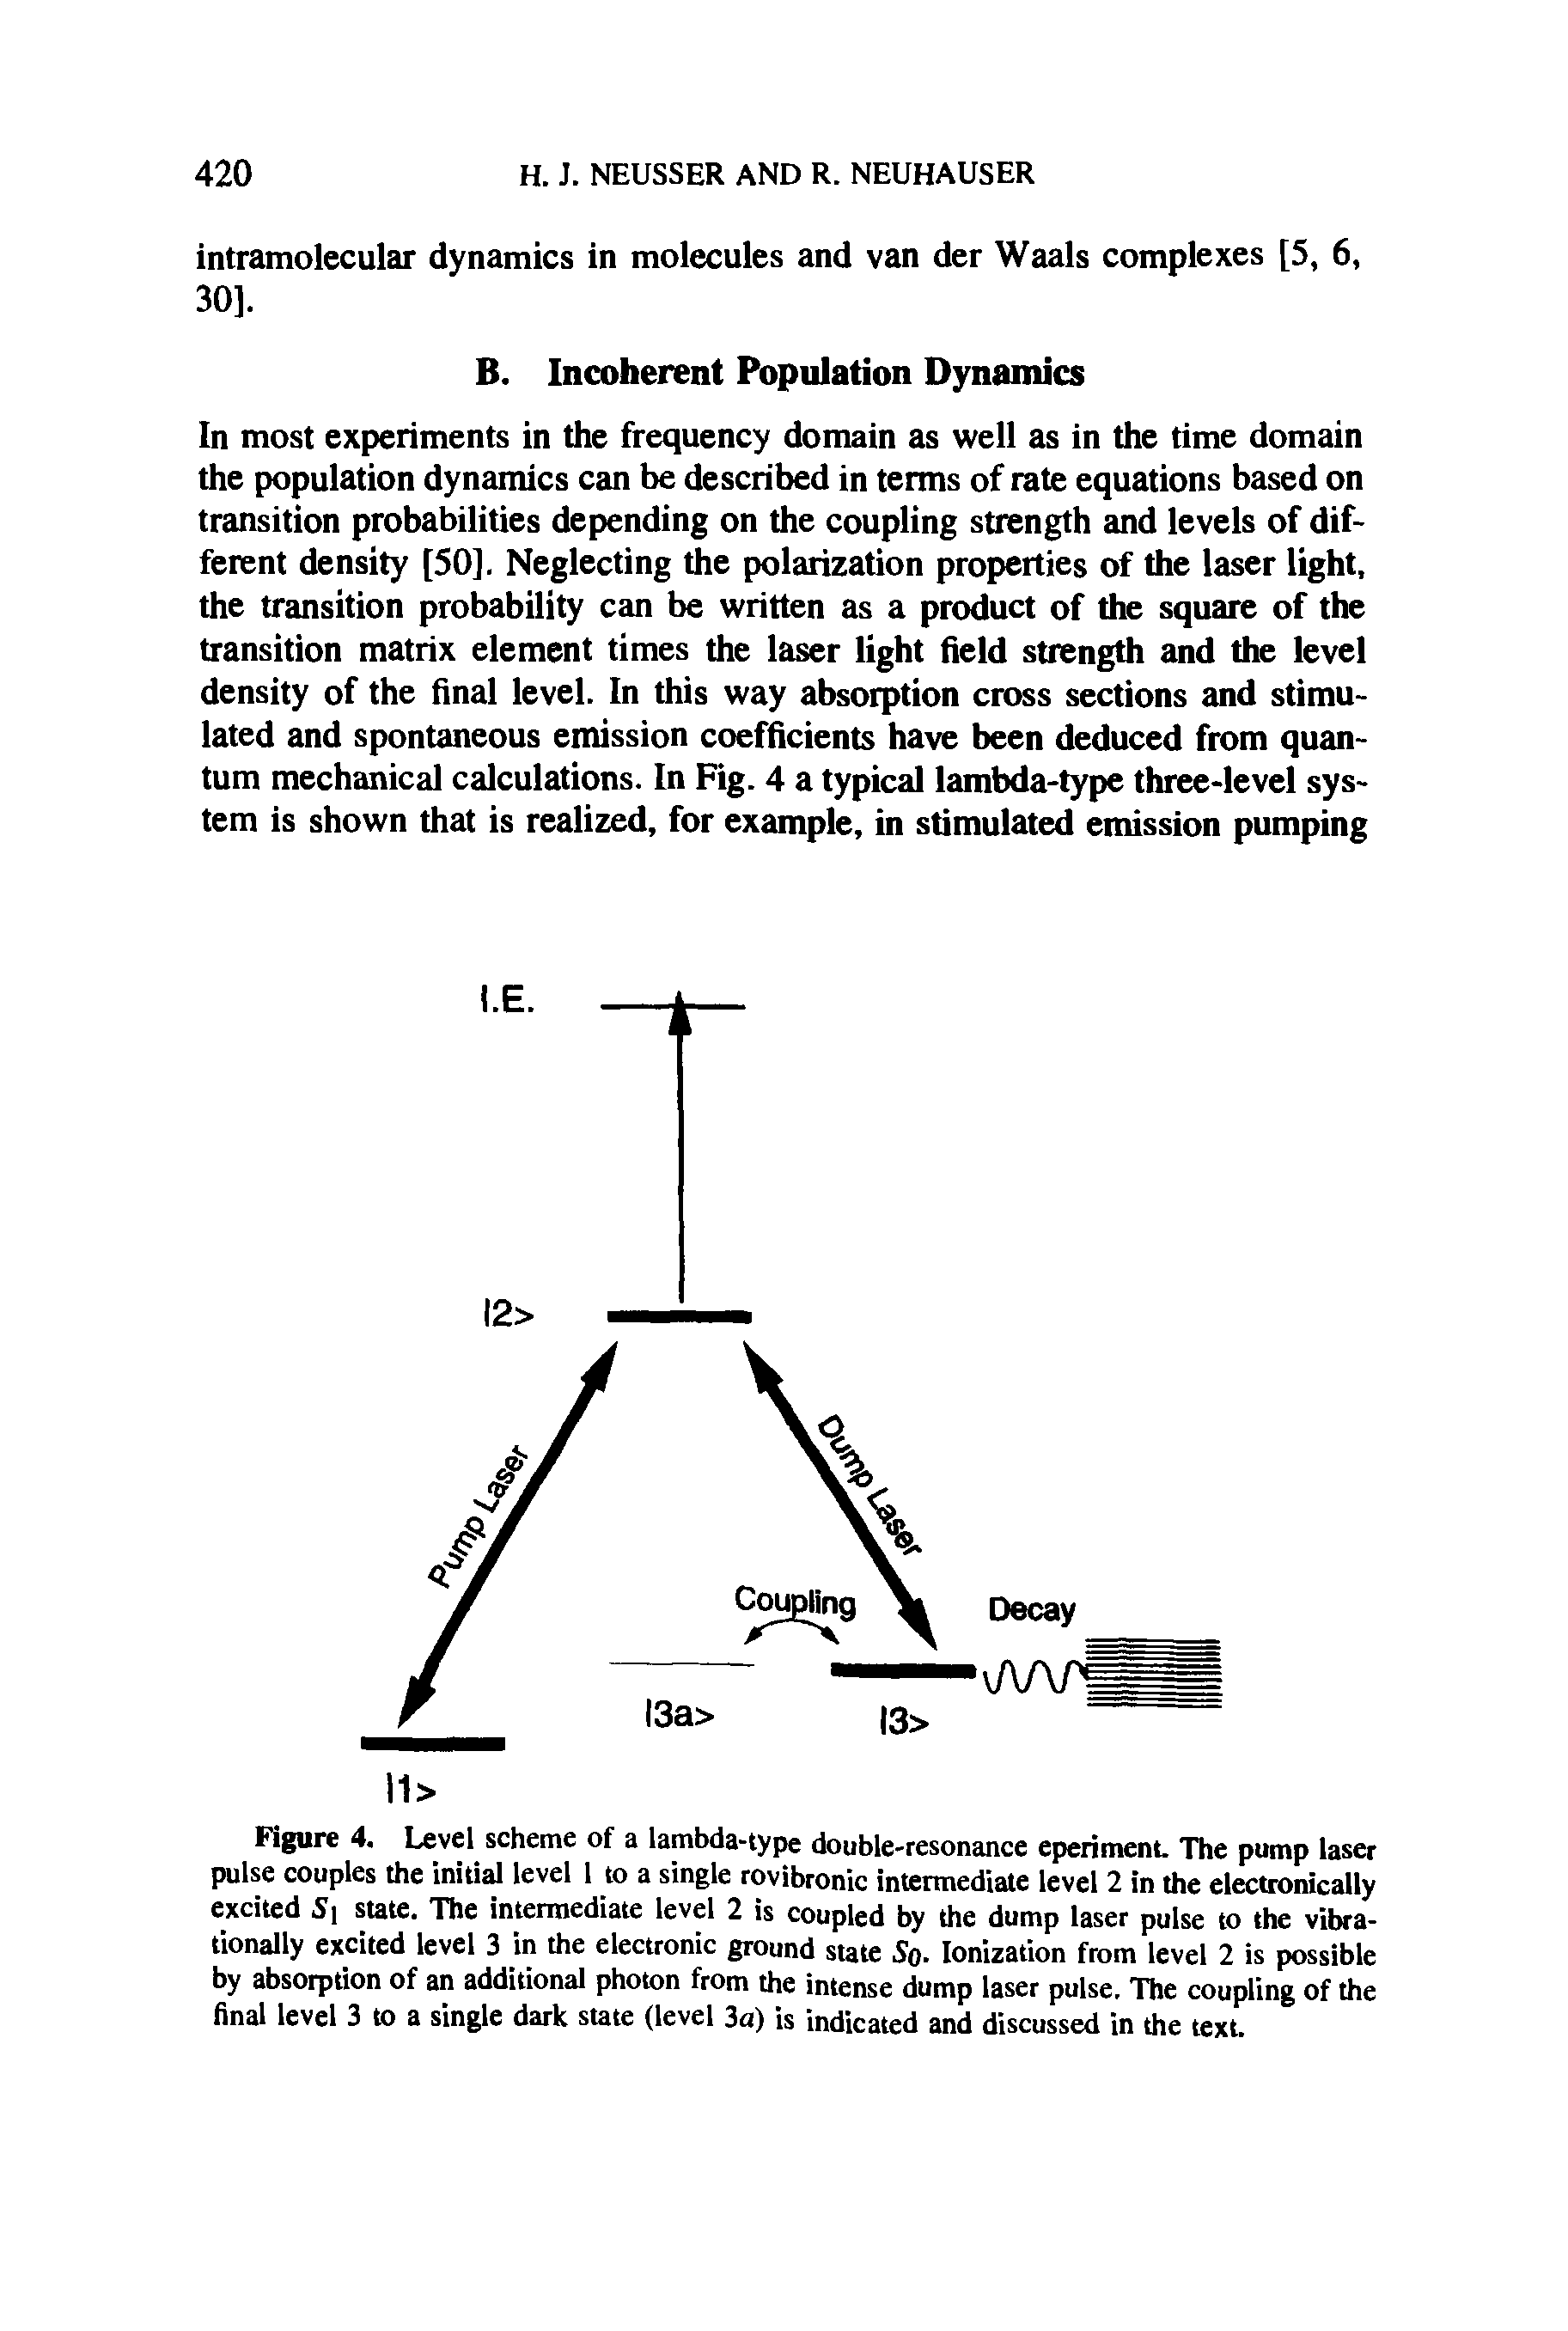 Figure 4. Level scheme of a lambda-type double-resonance eperiment. The pump laser pulse couples the initial level 1 to a single rovibronic intermediate level 2 in the electronically excited Si state. The intermediate level 2 is coupled by the dump laser pulse to the vibra-tionally excited level 3 in the electronic ground state So- Ionization from level 2 is possible by absorption of an additional photon from the intense dump laser pulse. The coupling of the final level 3 to a single dark state (level 3a) is indicated and discussed in the text.